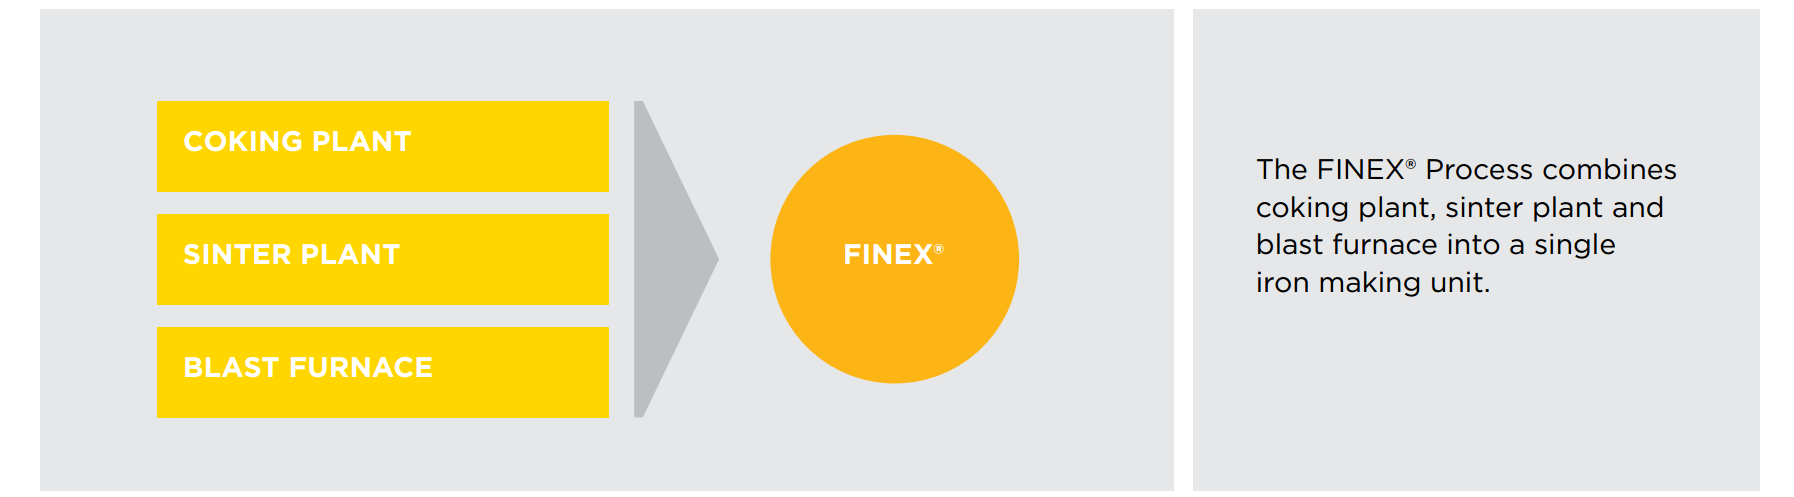 Chart describing how the FINEX® Process combines cooking plant, sinter plant, and blast furnace into a single iron making unit.